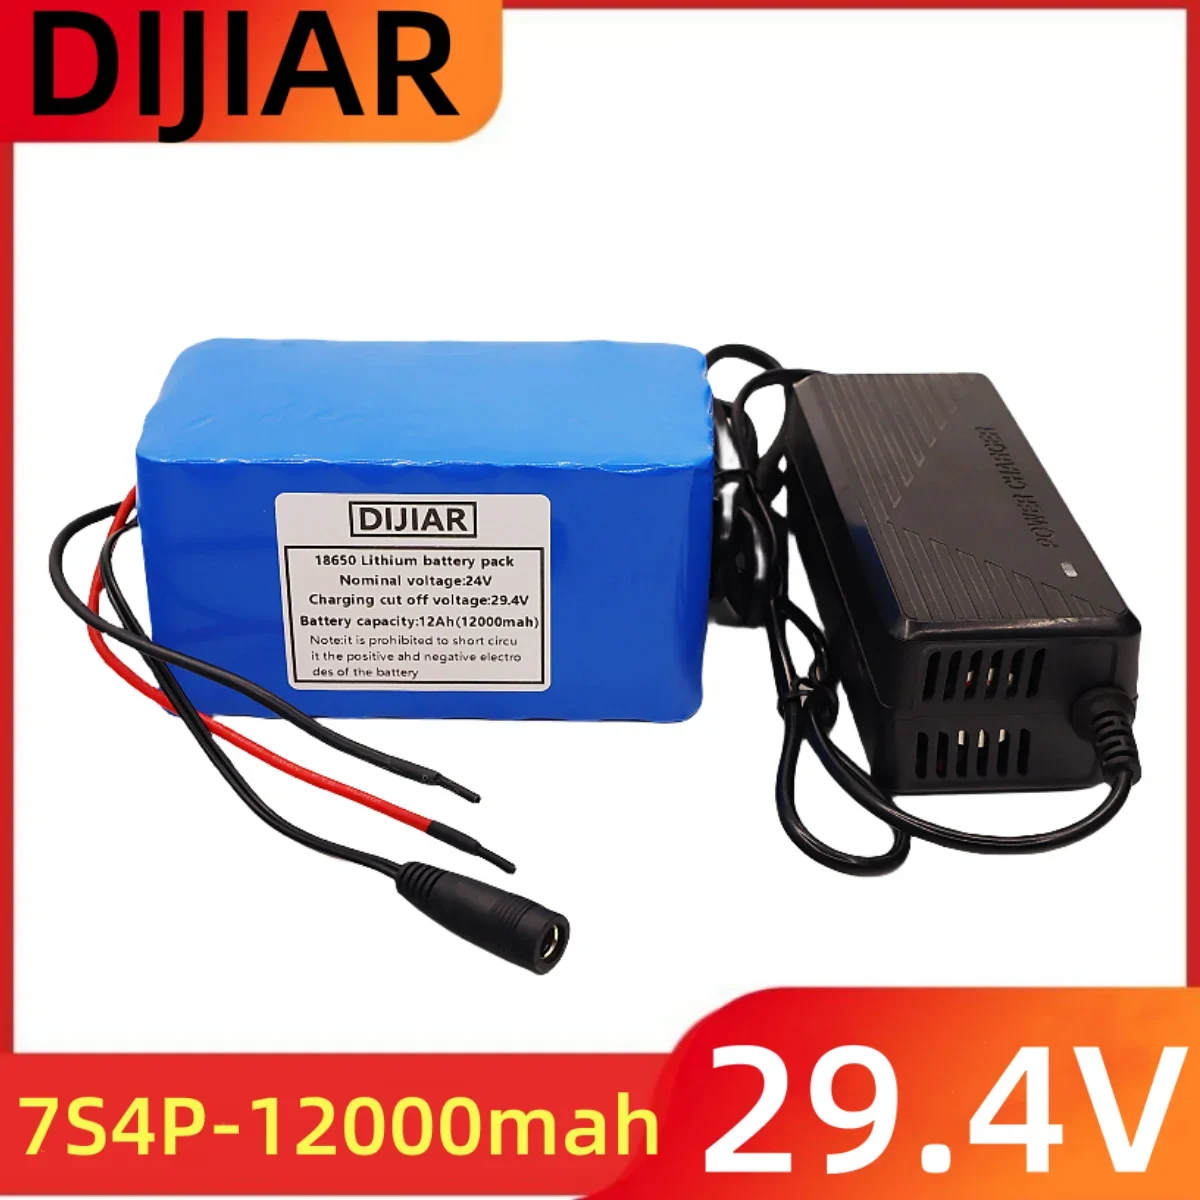 

29.4V12Ah18650 lithium ion battery pack 7S4P 24V Electric bicycle motor/scooter rechargeable battery with 15A BMS +29.4V Charger